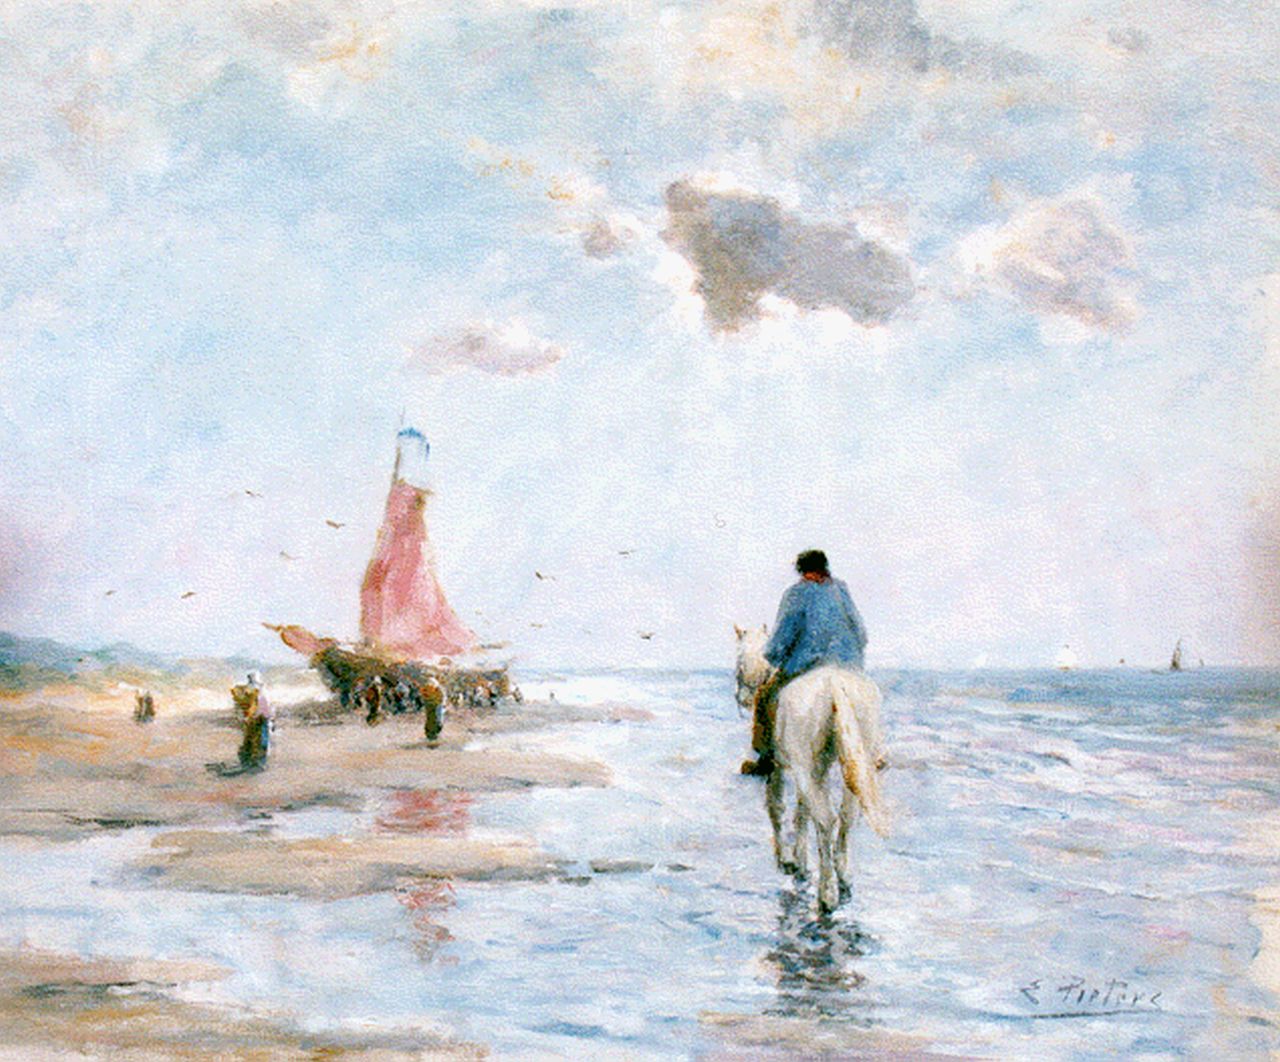 Pieters E.  | Evert Pieters, A horseman on the beach, oil on cardboard 50.8 x 61.6 cm, signed l.r.